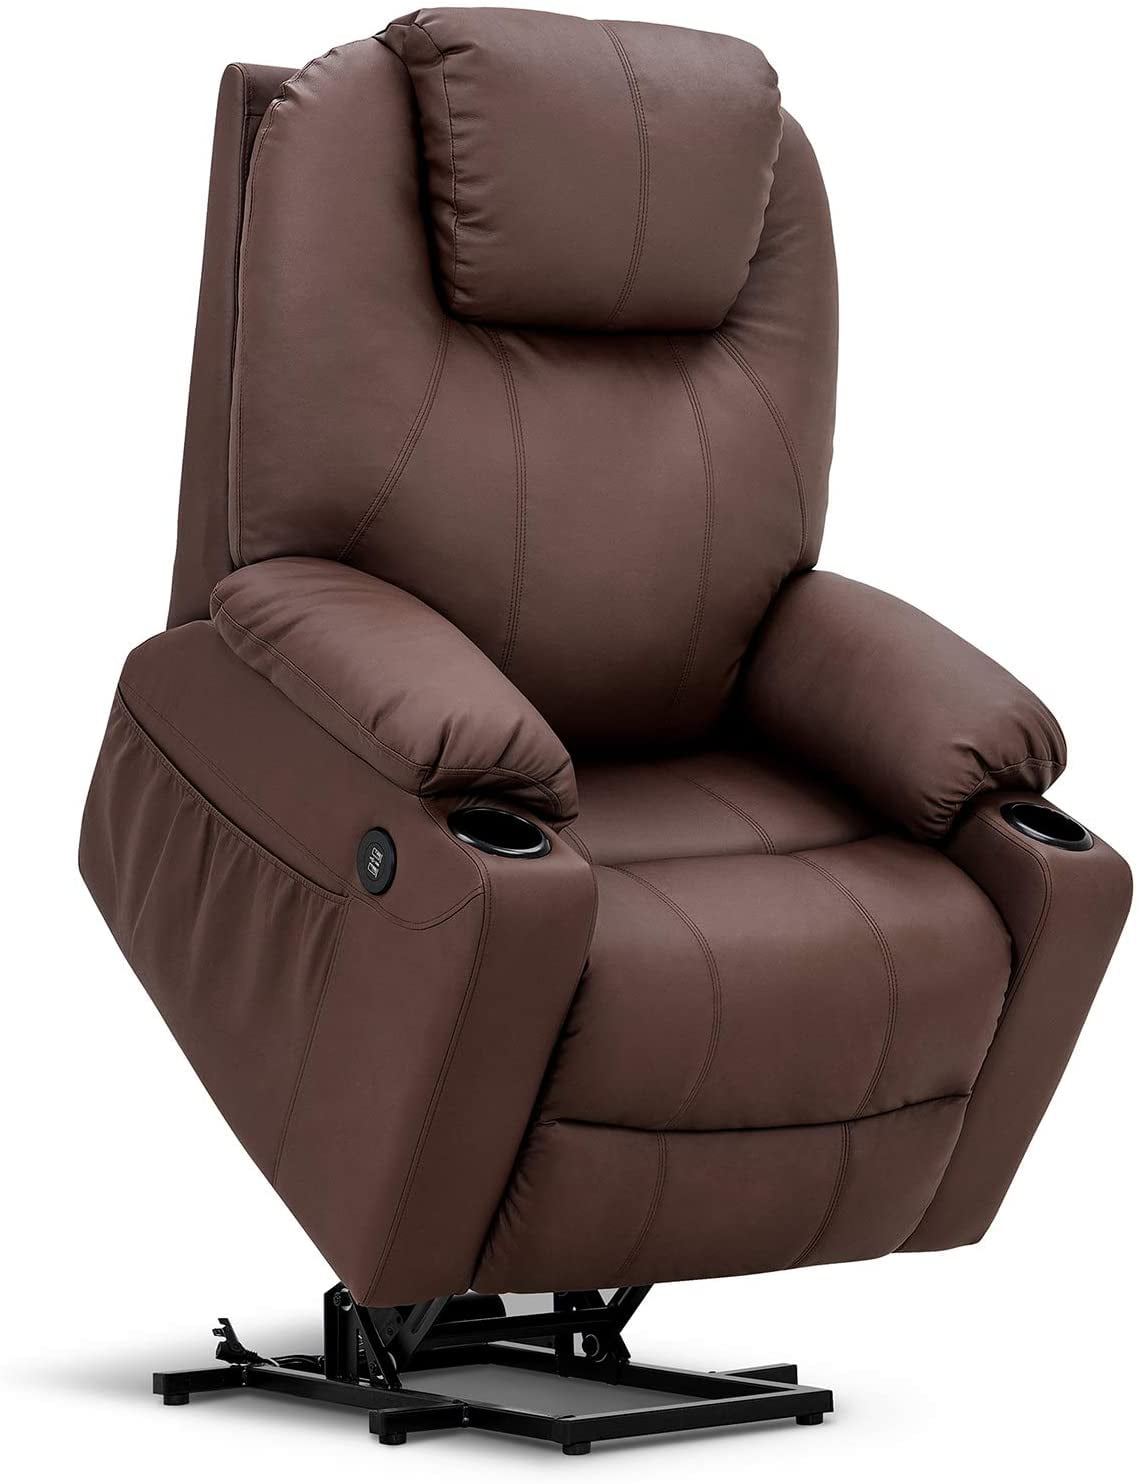 Mcombo Large Power Lift Recliner Chair With Massage And Heat For Elderly Big And Tall People 3 Positions 2 Side Pockets And Cup Holders Usb Ports Faux Leather 7517 Walmart Com Walmart Com